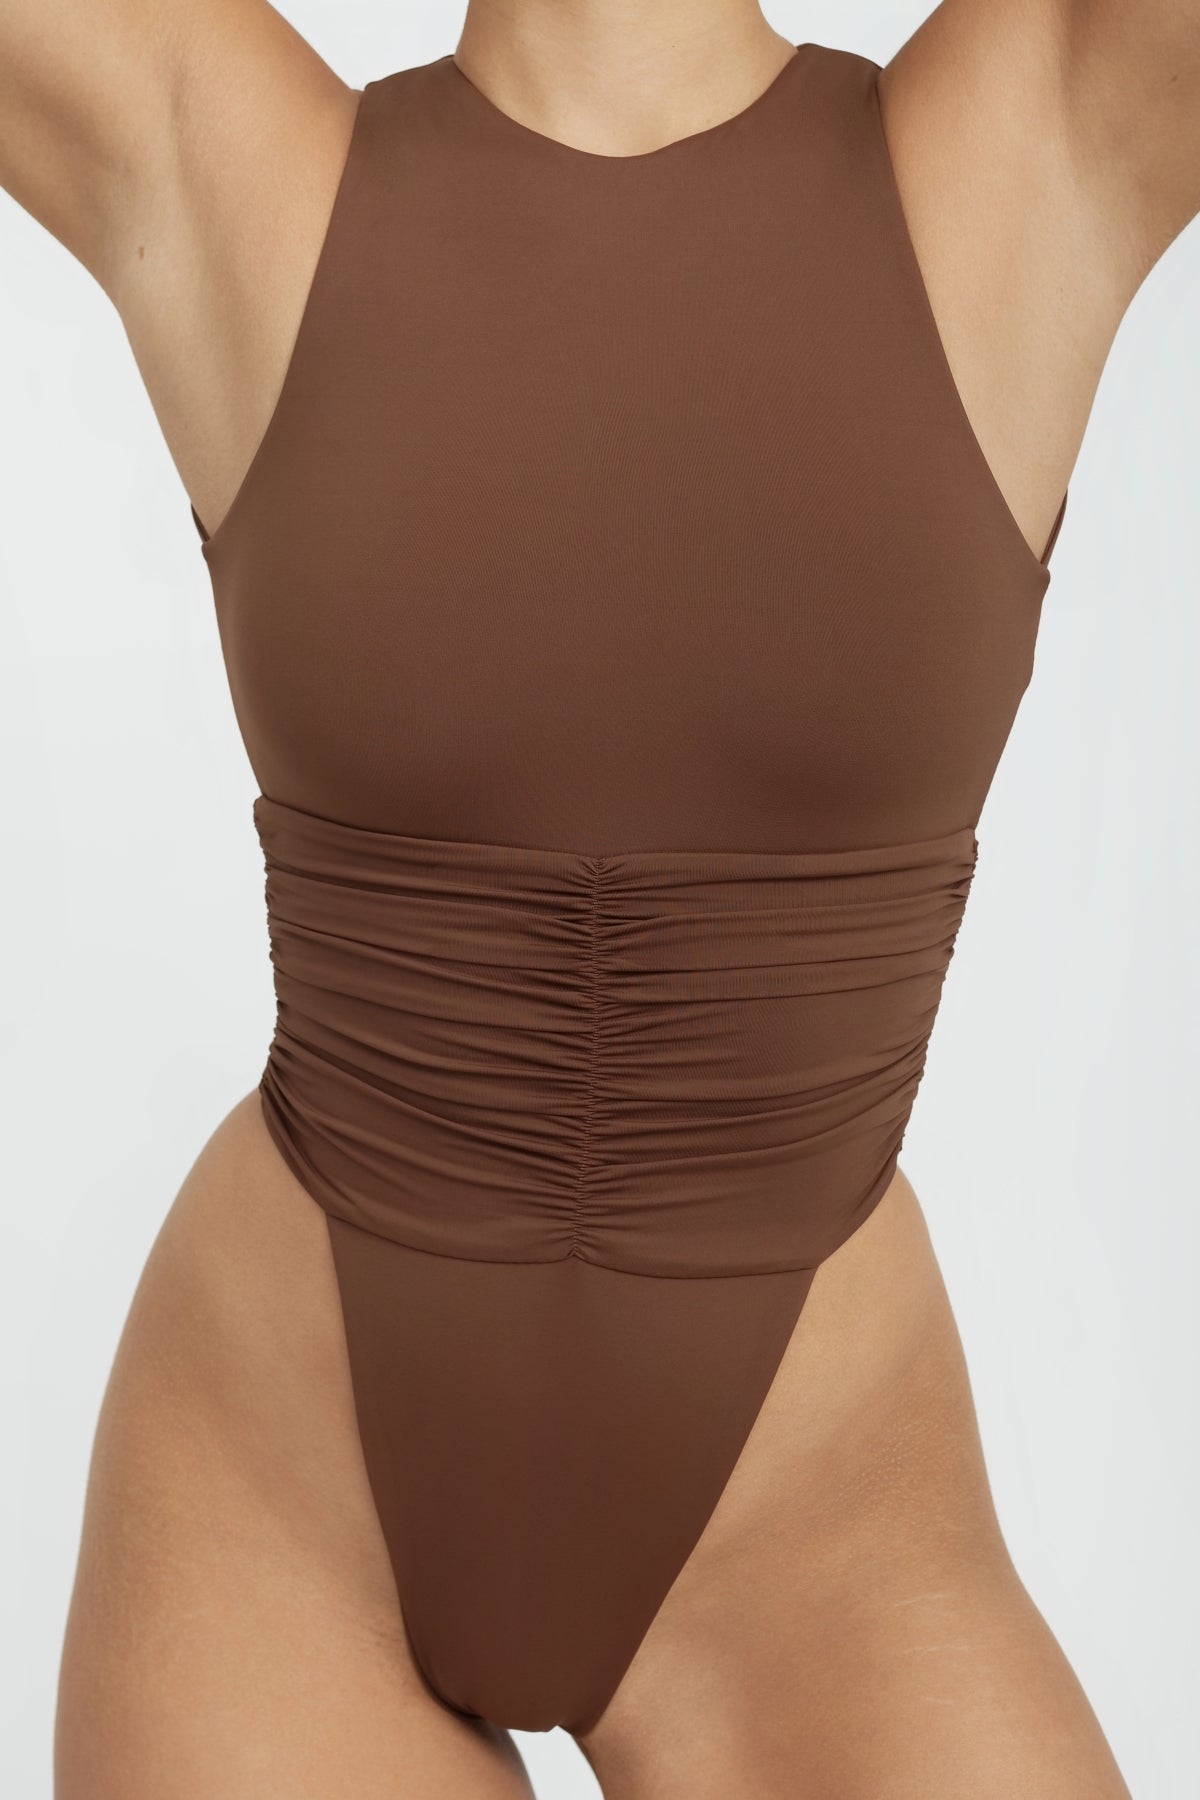 Jace Thong One Piece - Chocolate